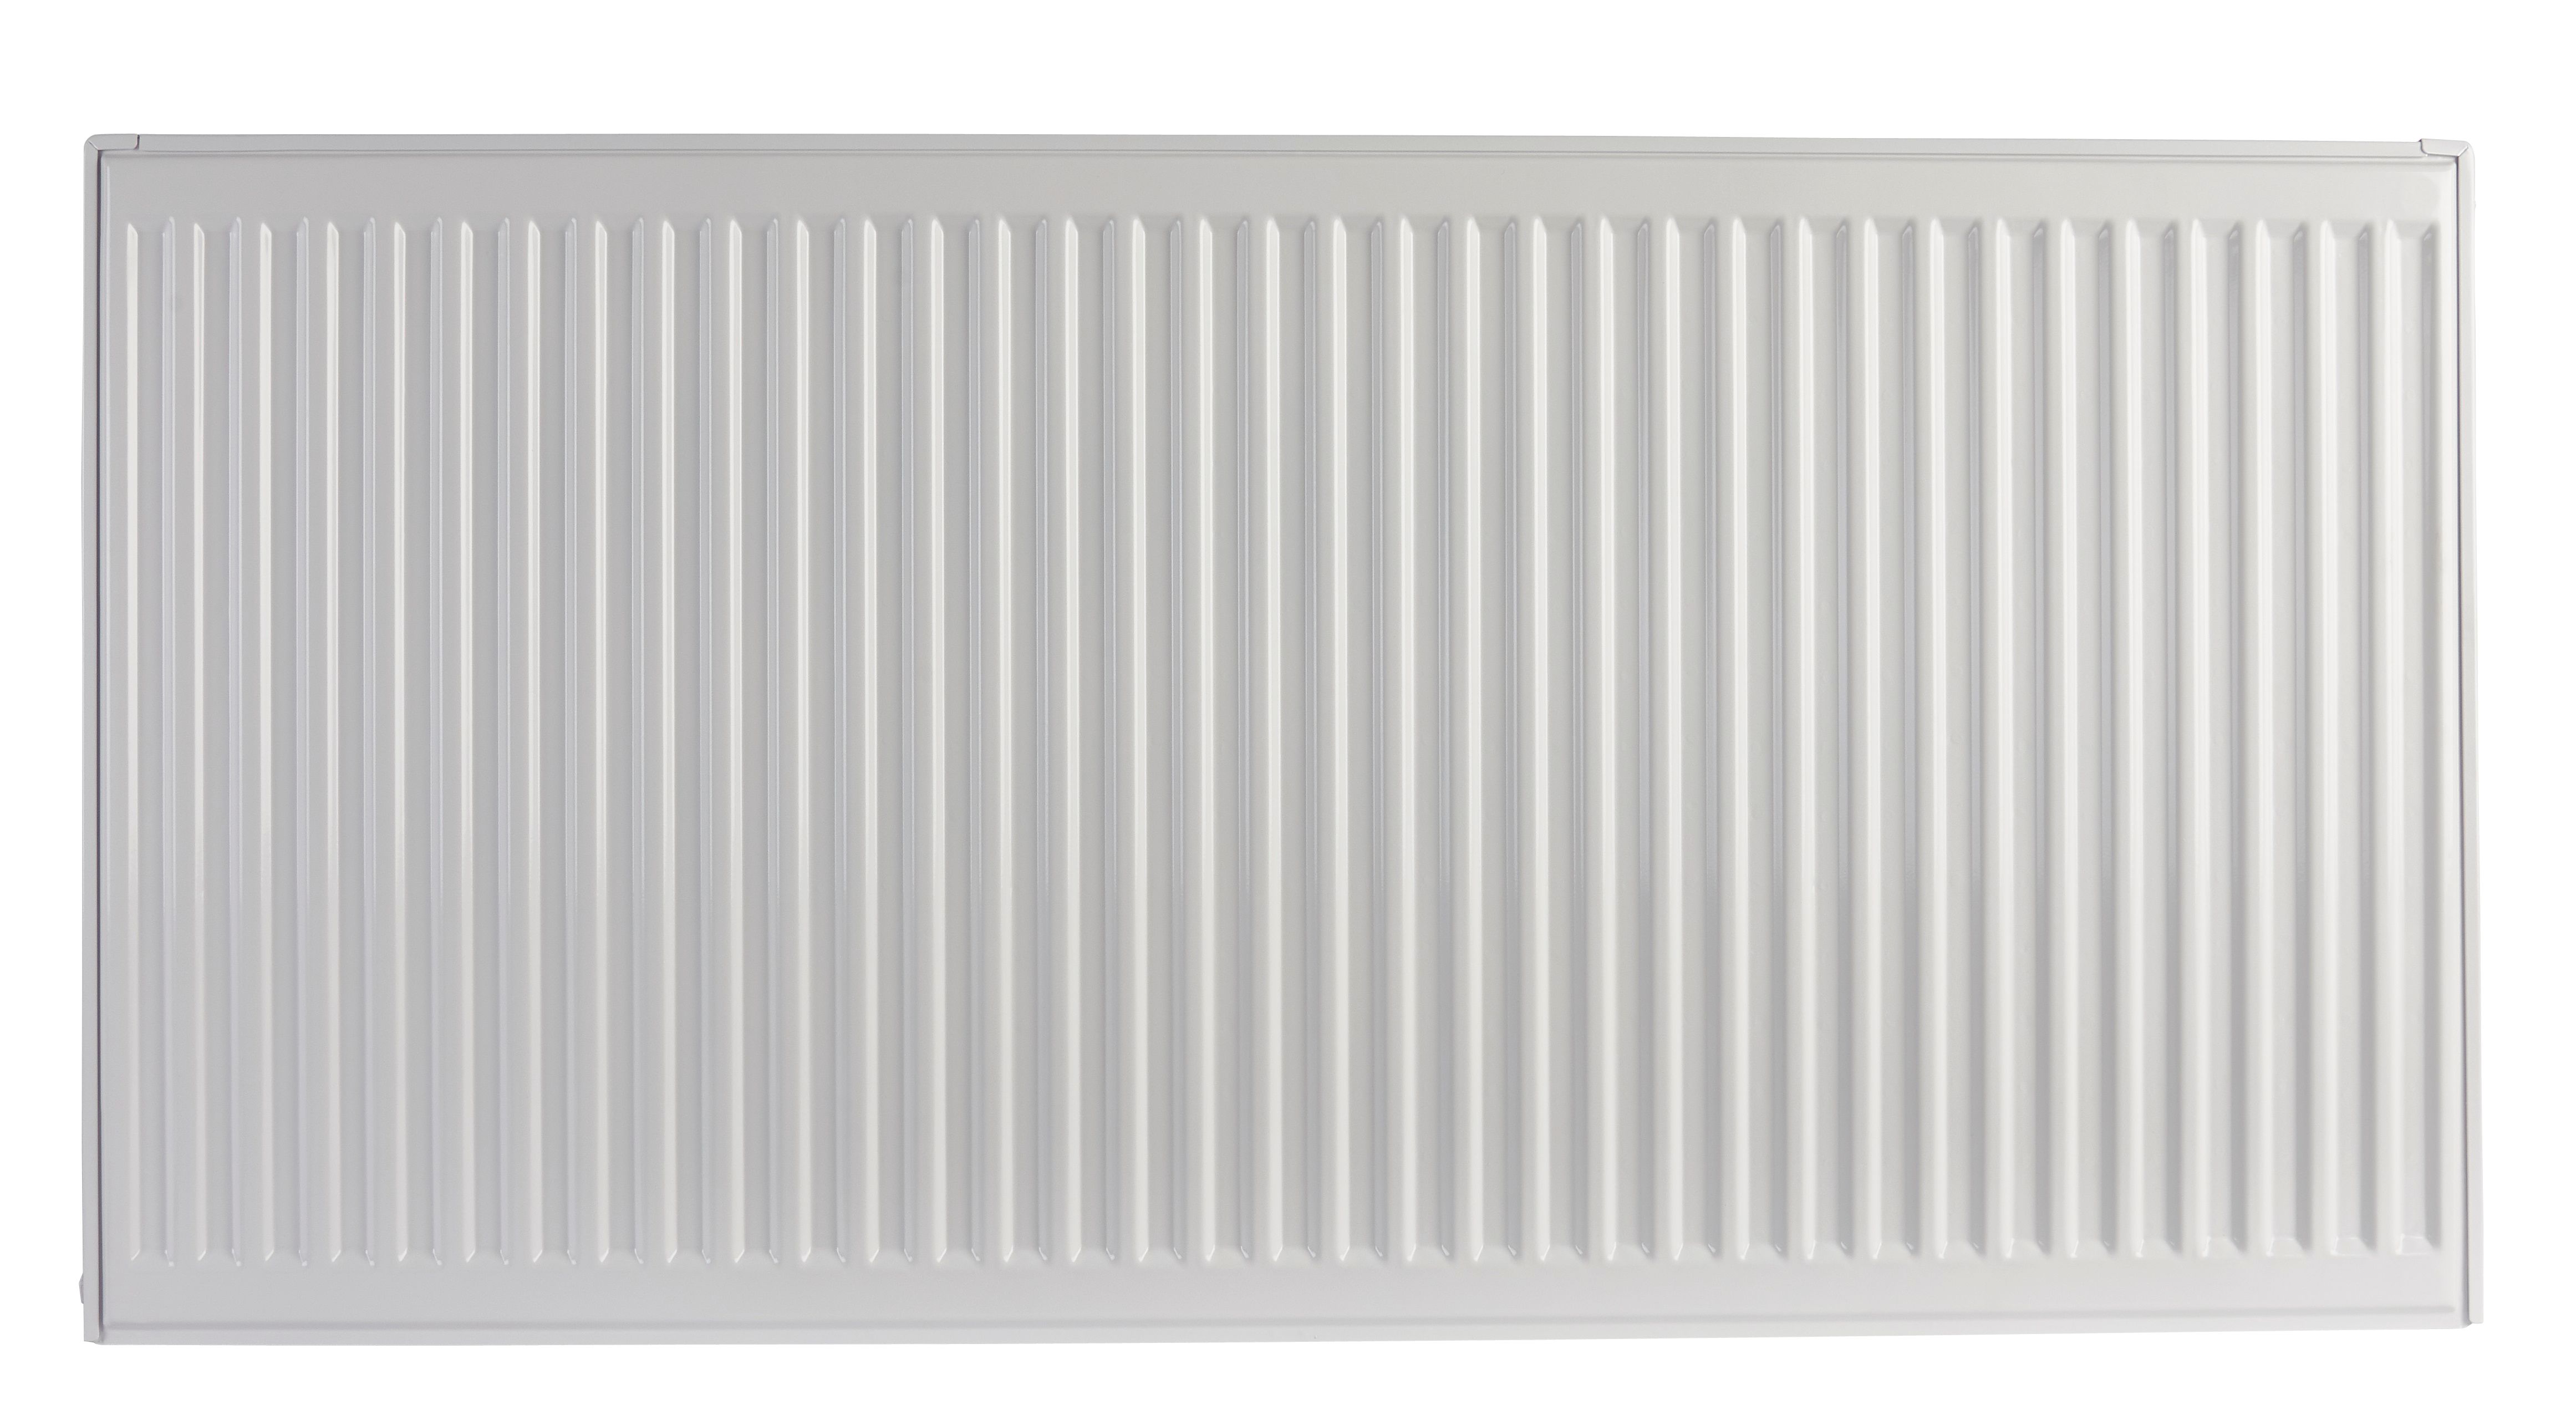 Image of Homeline by Stelrad 500 x 800mm Type 21 Double Panel Plus Single Convector Radiator